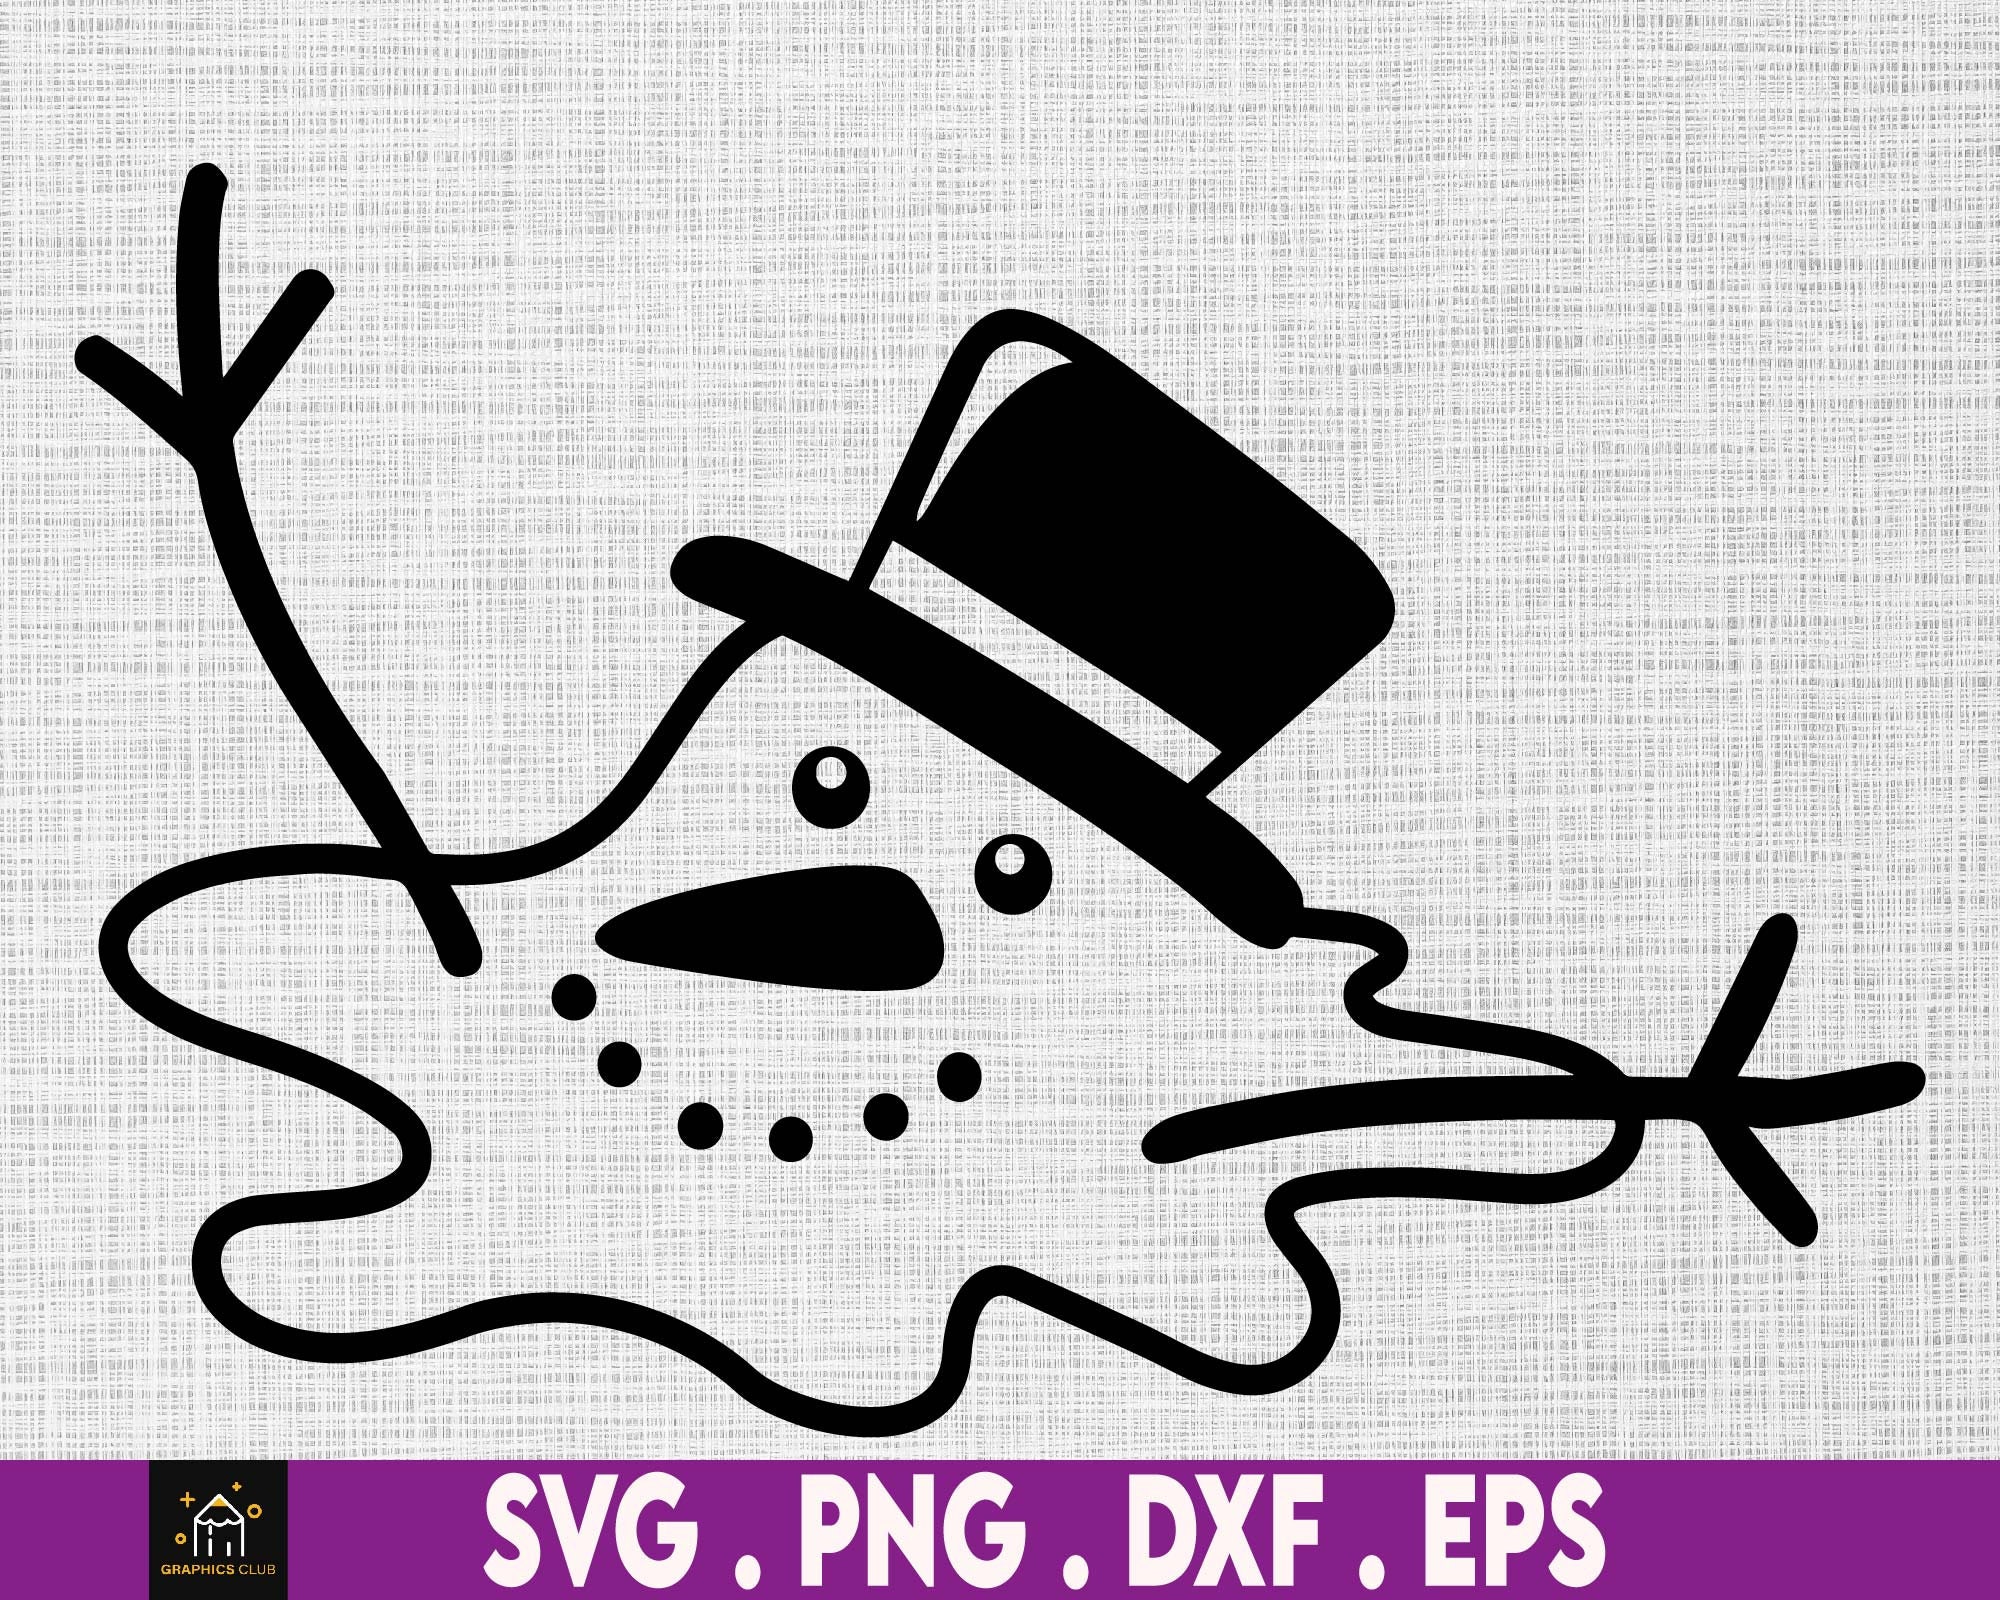 Snowman Clipart Melting Snowmen Clip Art Sequential Steps Puddle Thawing  Top Hat Frosty Life Cycle